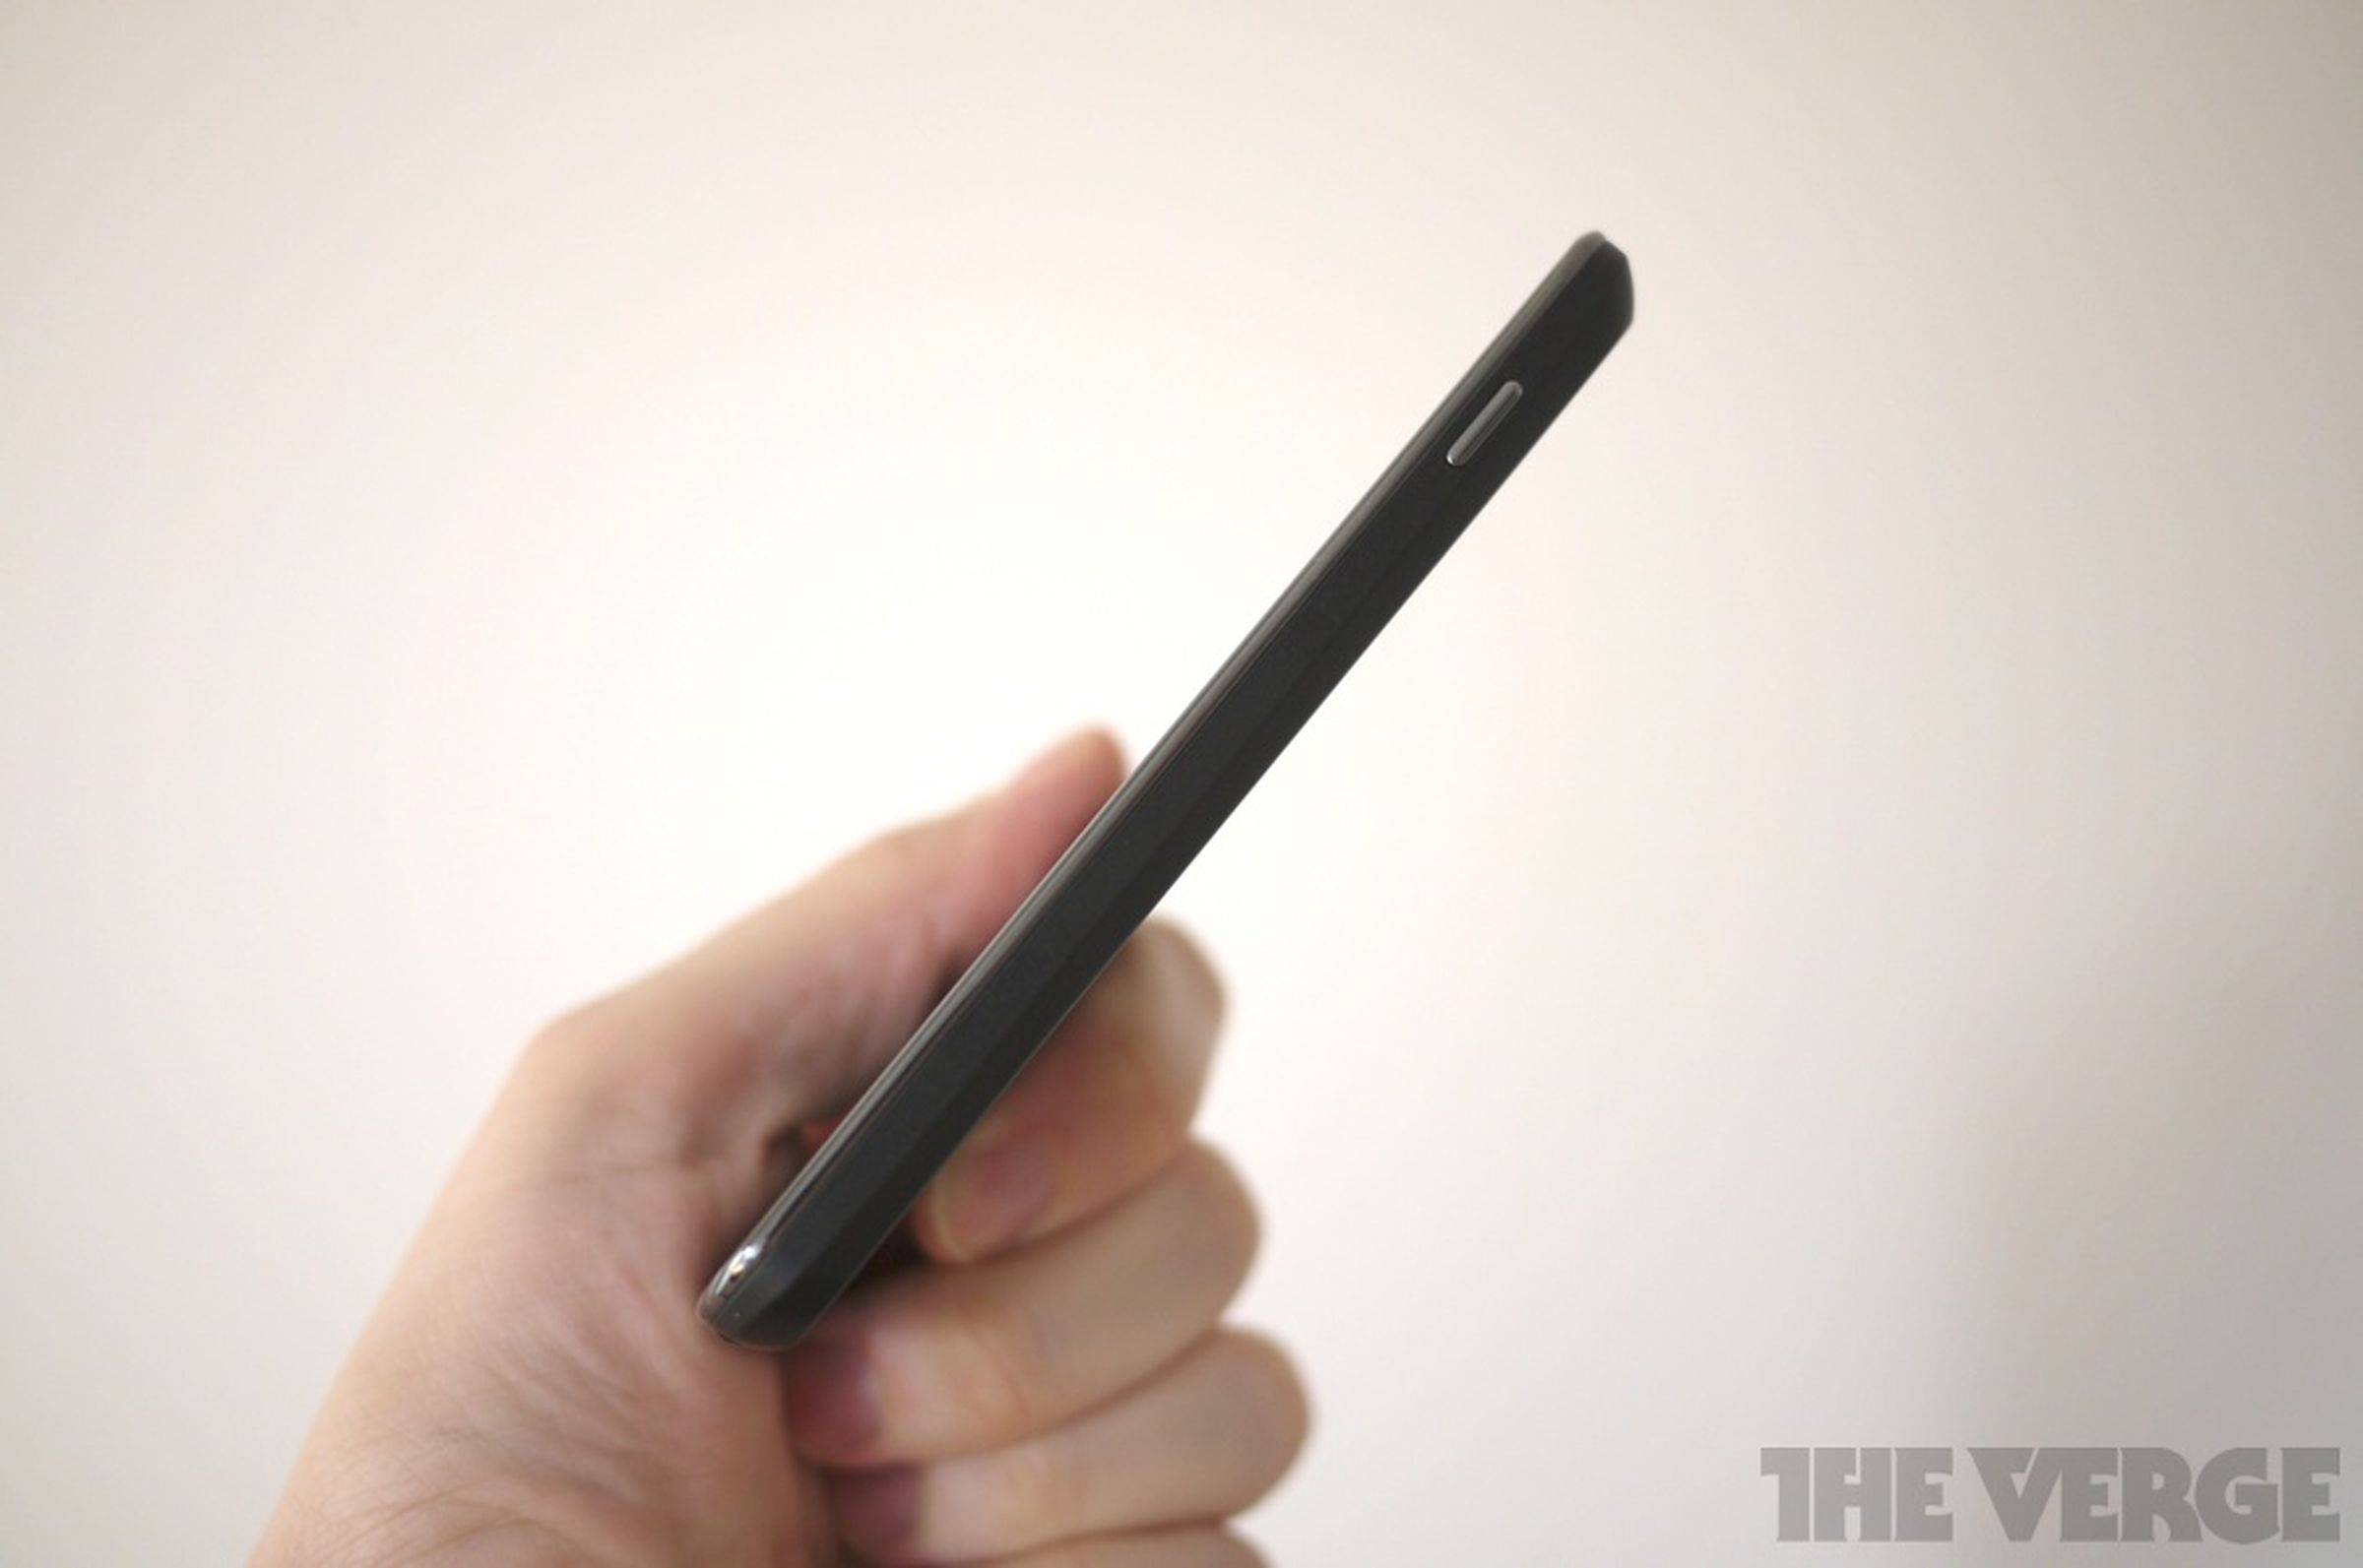 Hands-on with the Nexus 4